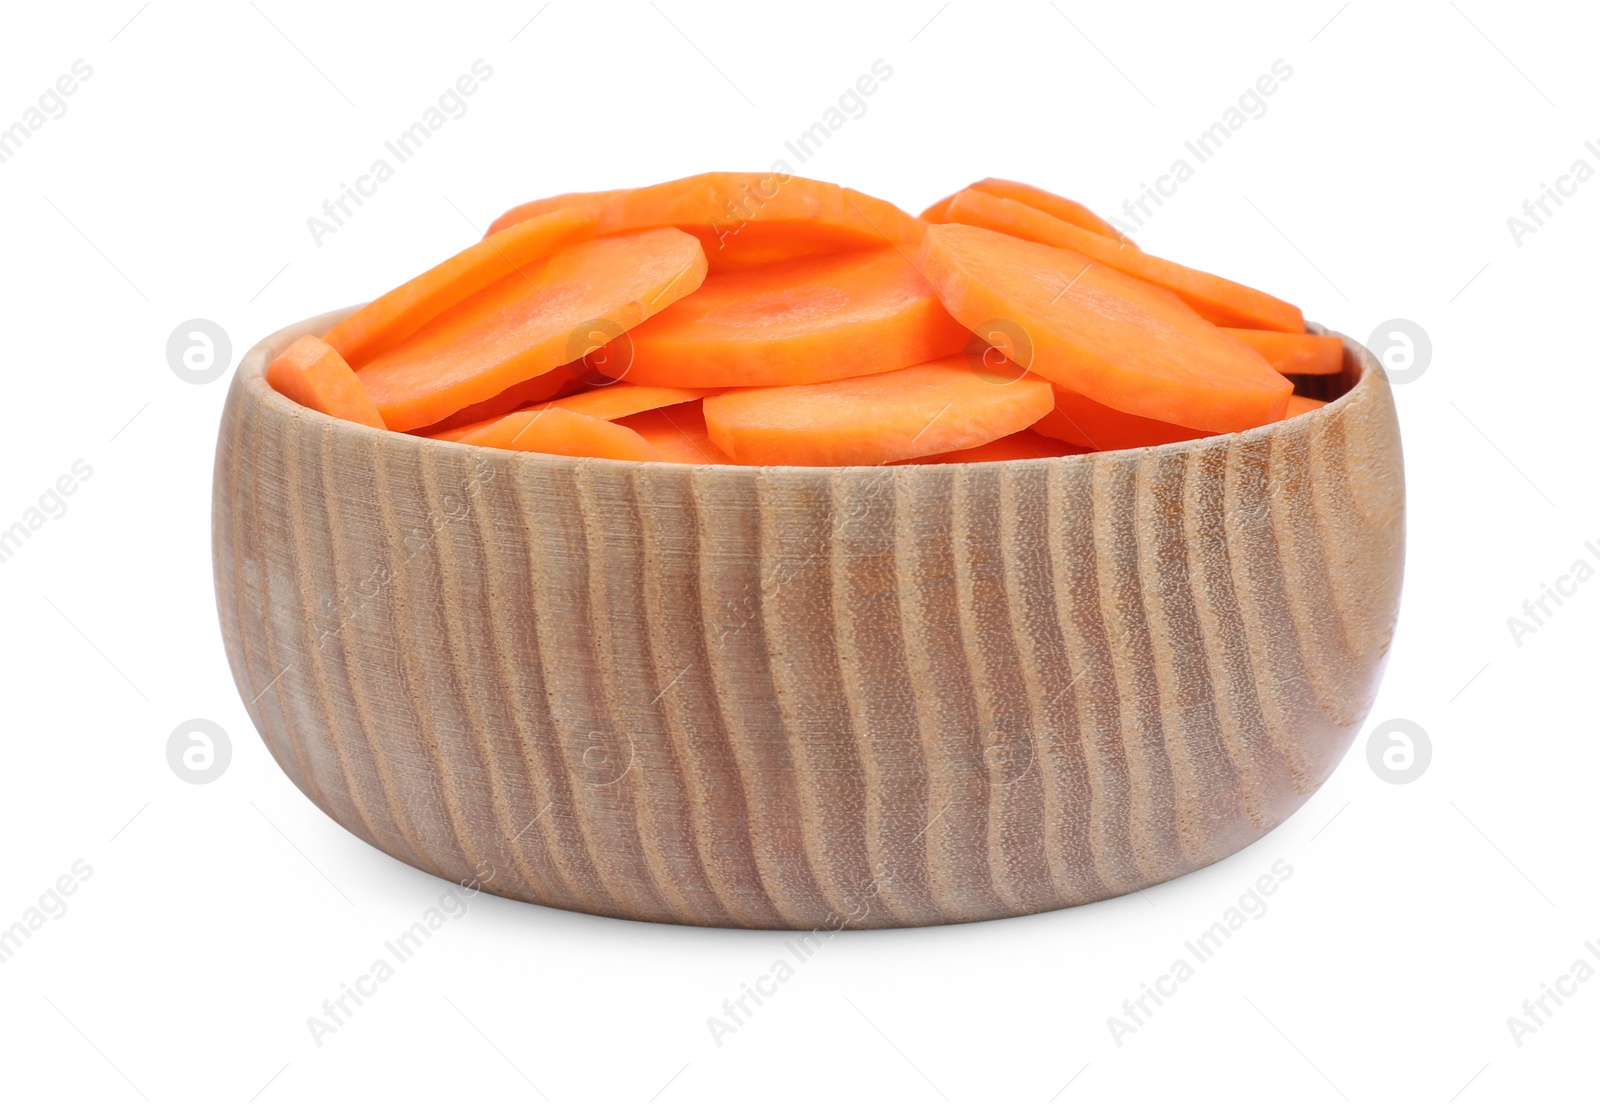 Photo of Bowl with tasty cut carrots isolated on white